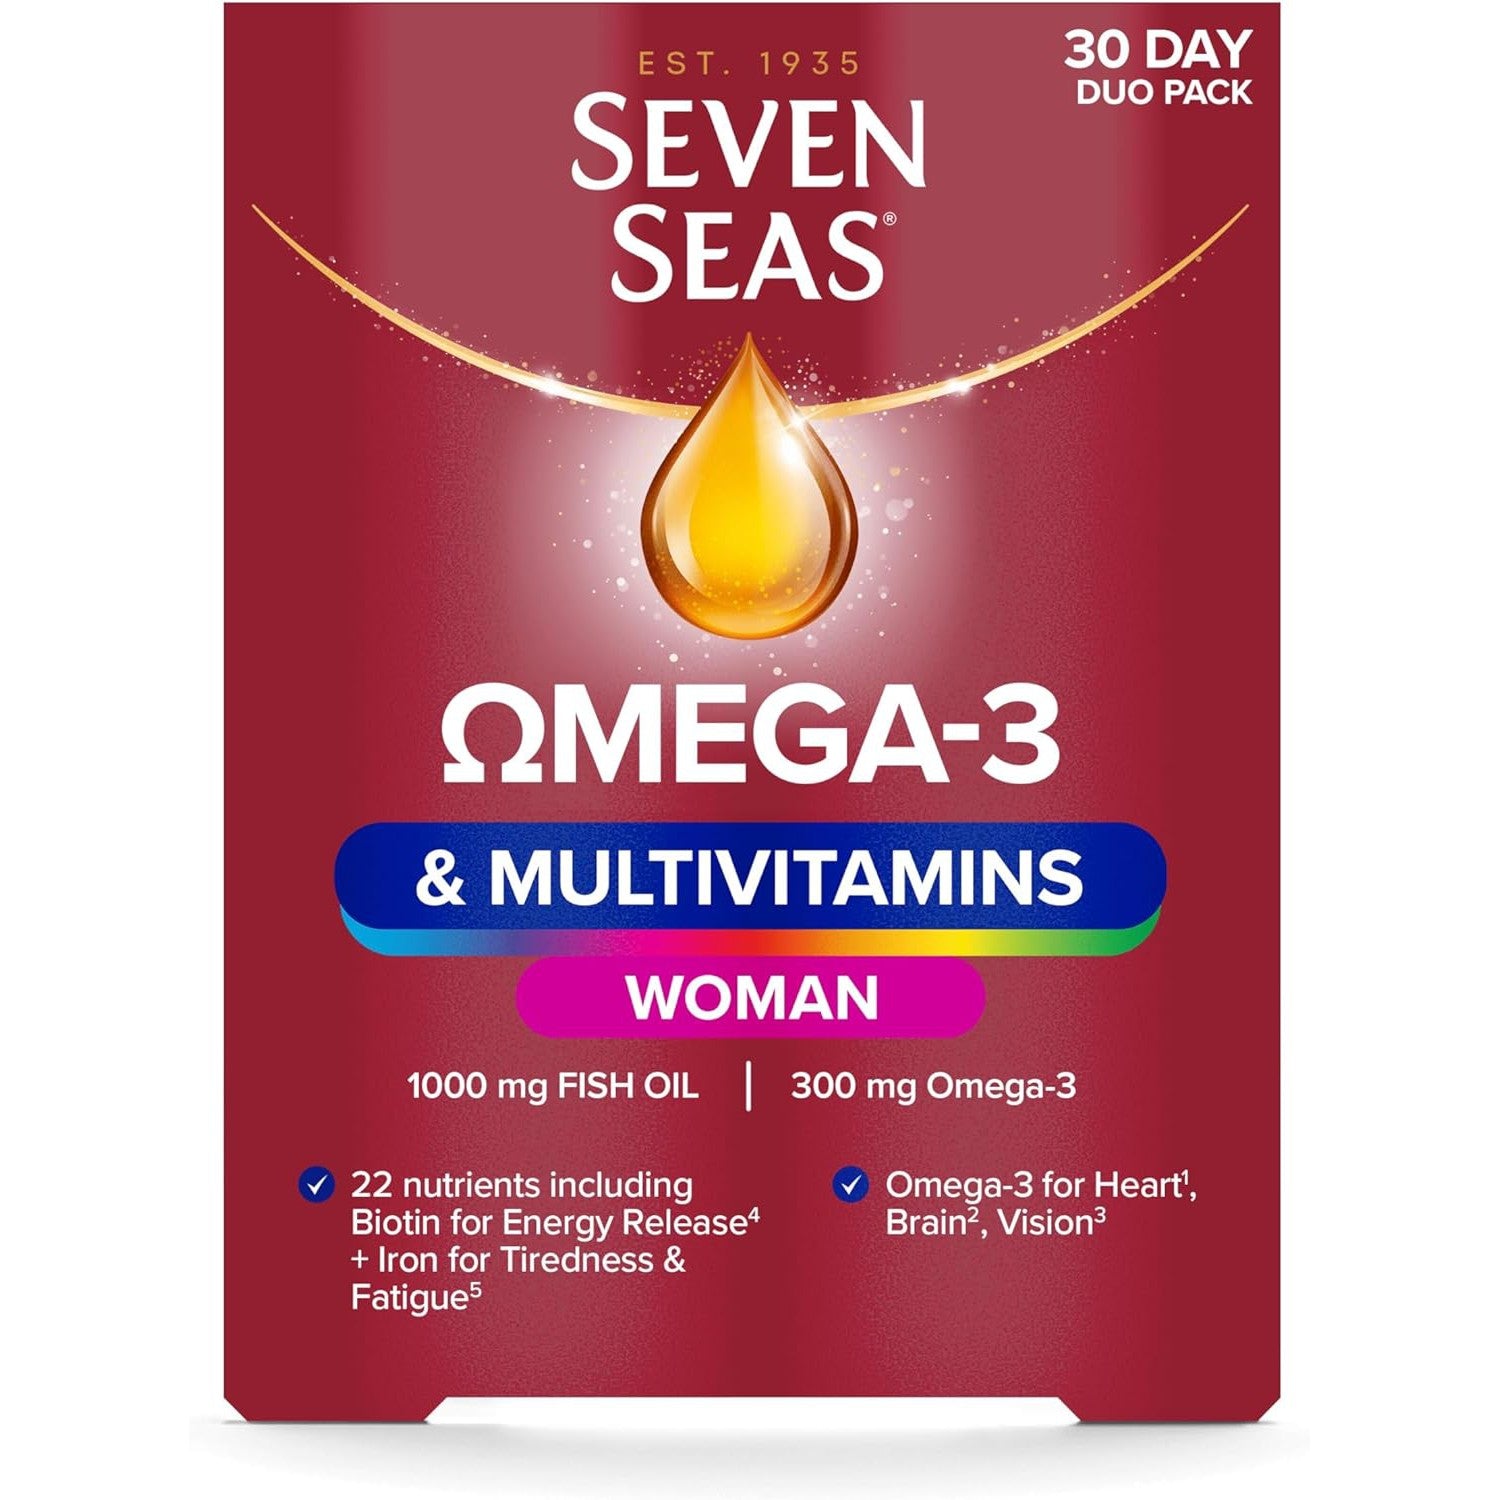 Seven Seas Omega-3 & Multivitamins Woman, With Biotin and Iron, 30-Day Duo Pack, 30 Omega-3 Capsules and 30 Multivitamin Tablets